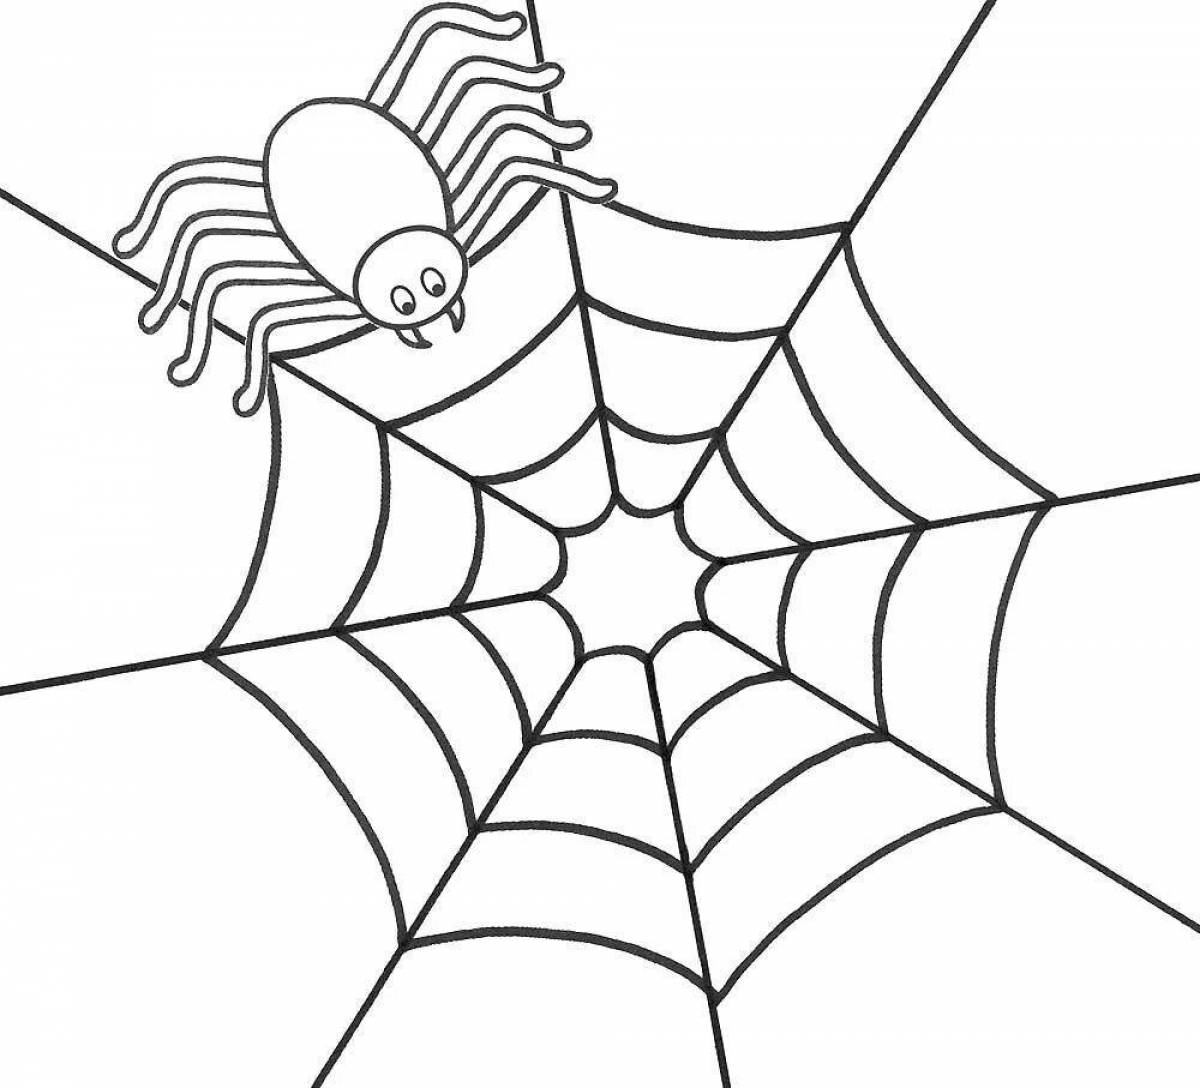 Showy web coloring book for kids